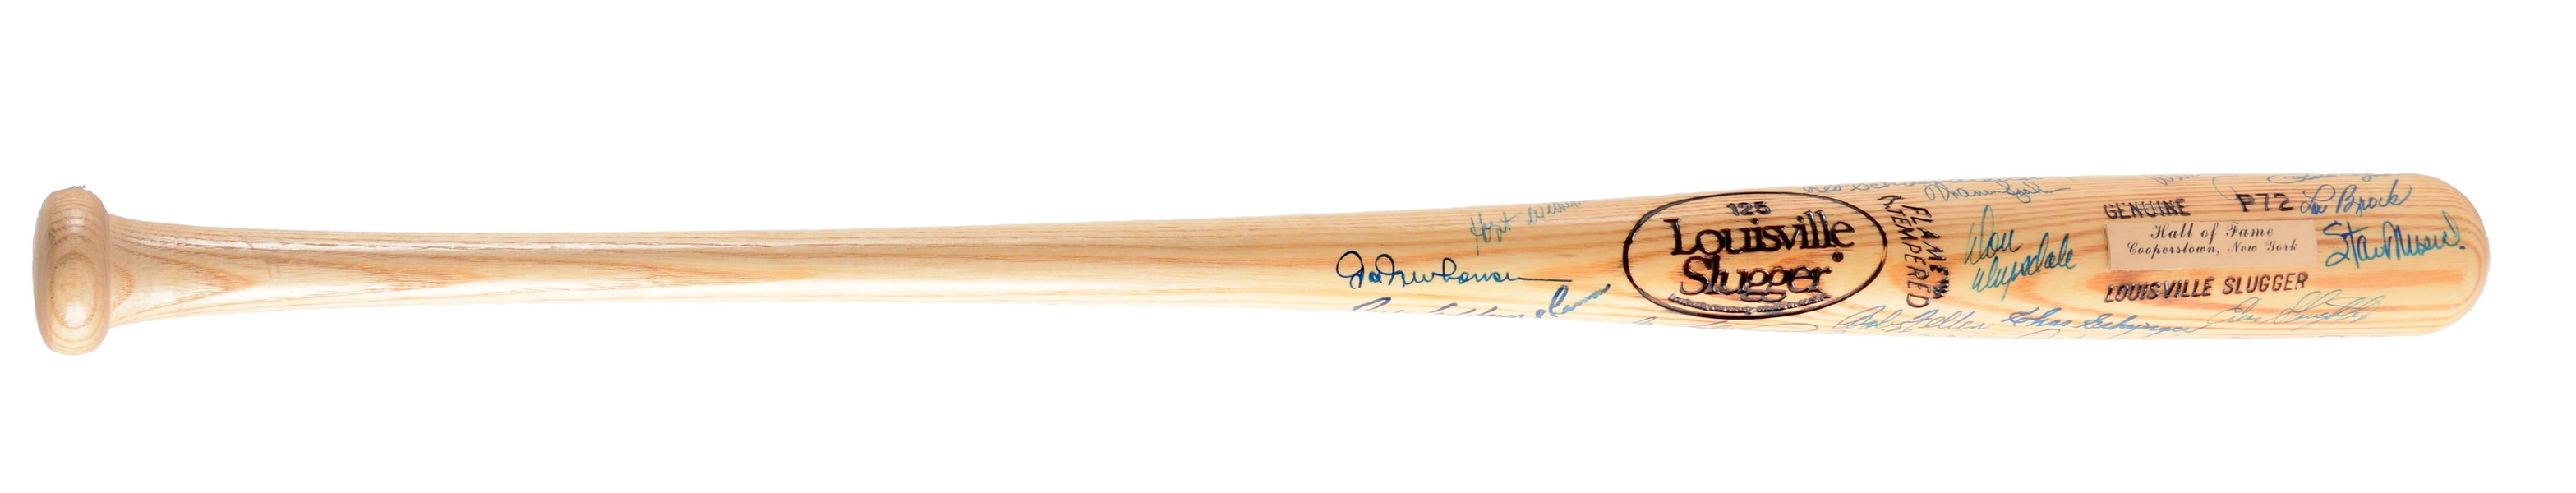 EXCEPTIONAL HOF SIGNED BASEBALL BAT INCLUDING MANTLE WILLIAMS & AARON.